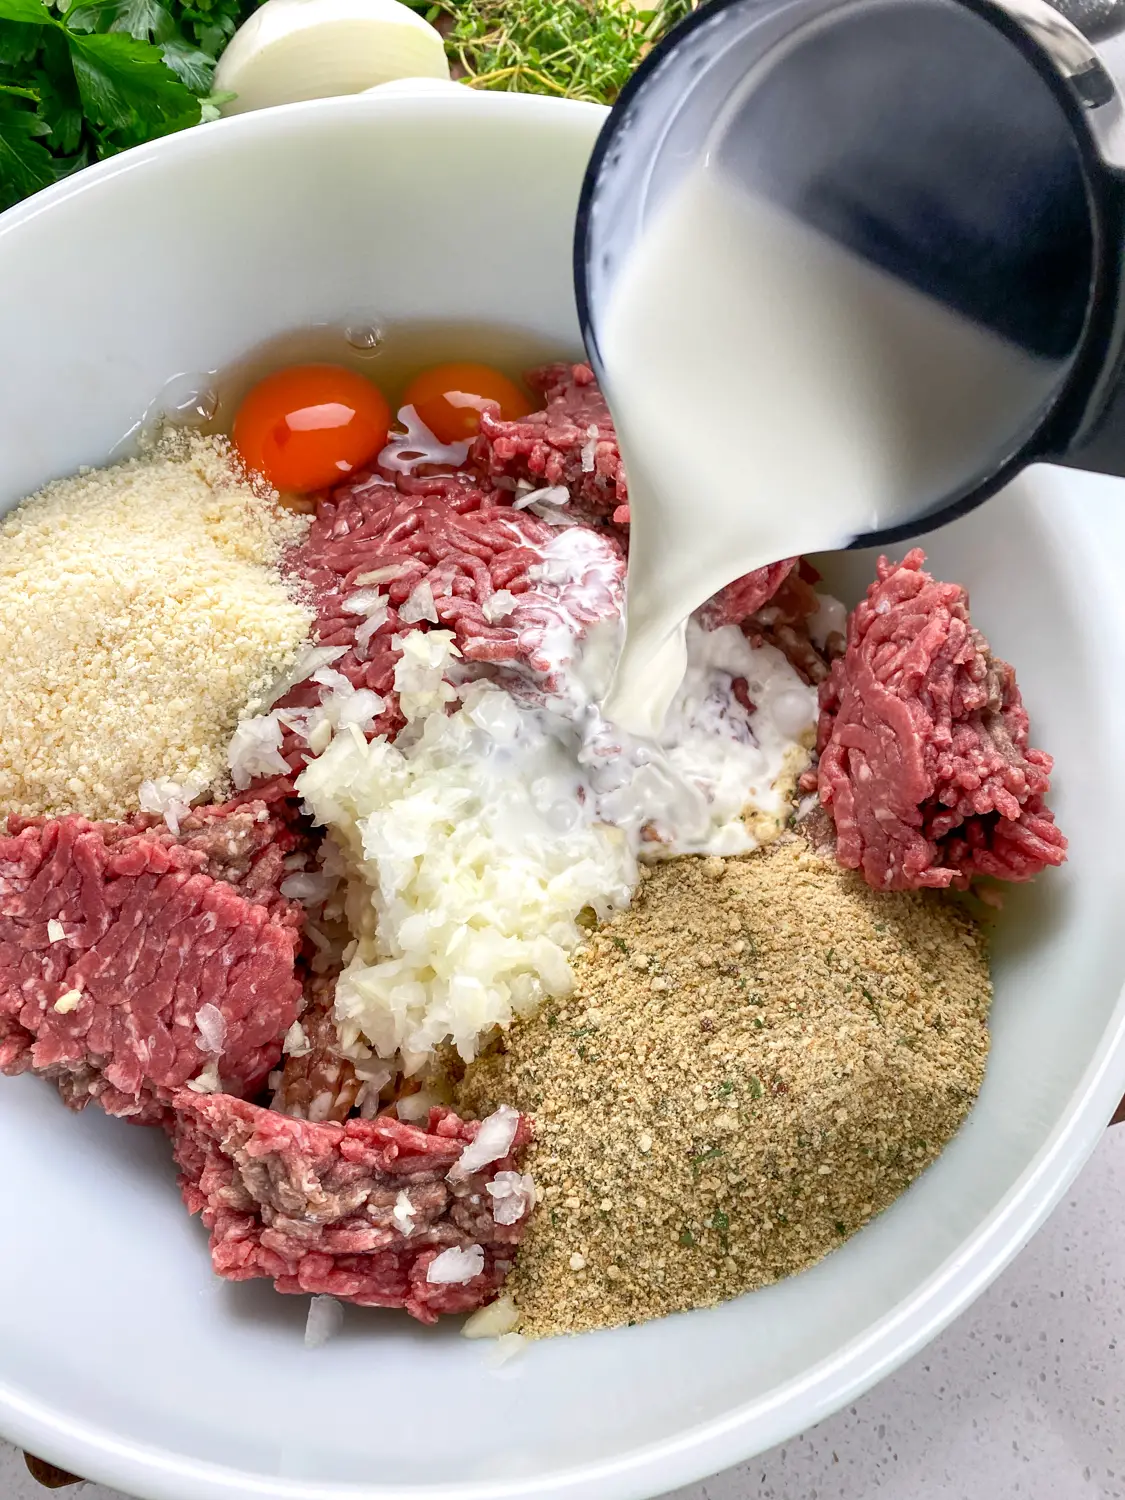 In a large mixing basin, combine the meat, pork, onion, garlic, breadcrumbs, Parmesan cheese, eggs, and whole milk